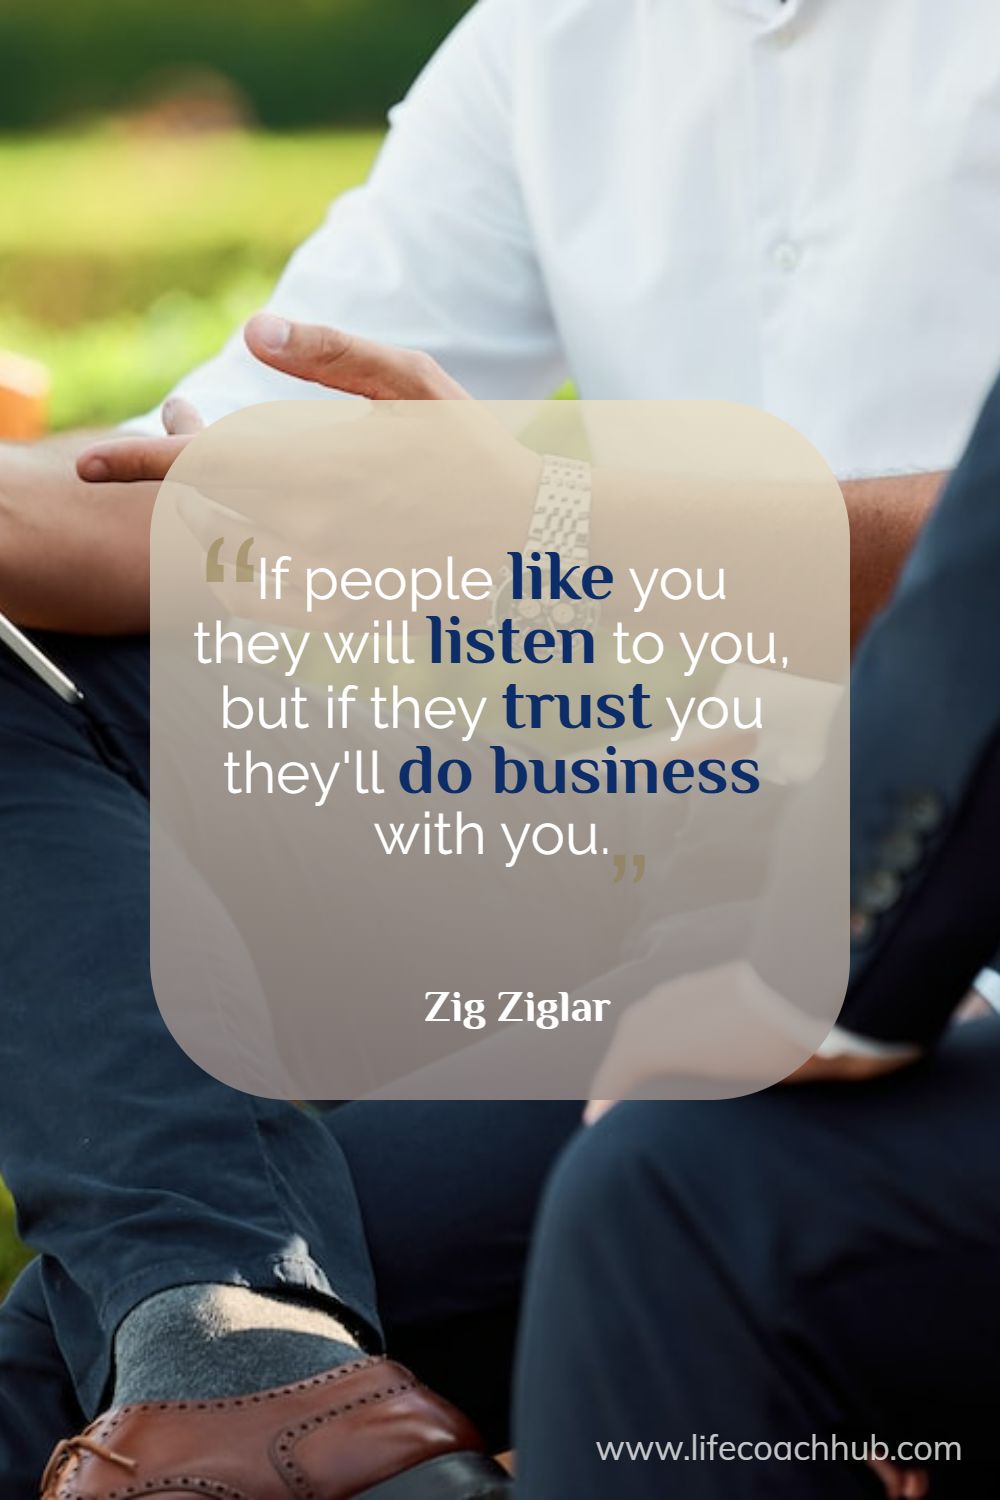 If people like you they will listen to you, but if they trust you they'll do business with you. Zig Ziglar Coaching Quote